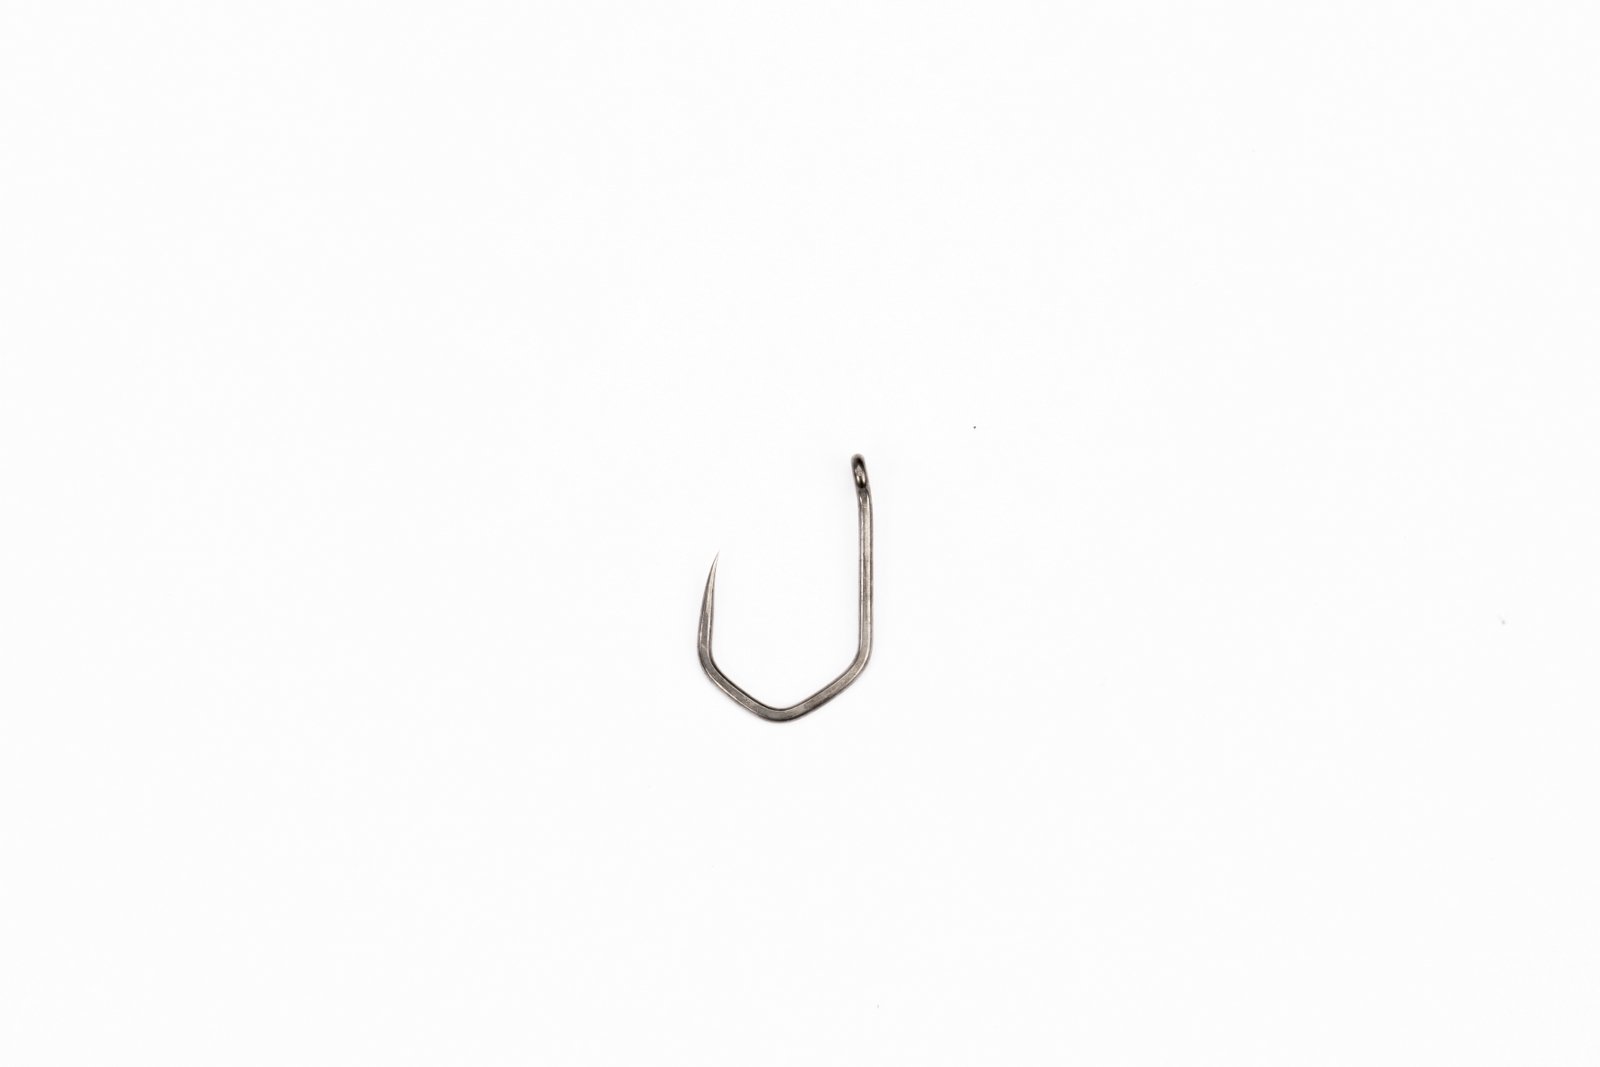 Nash Claw Size 4 Micro Barbed Hooks & Sharpening Tackle T6133 International Shop Europe